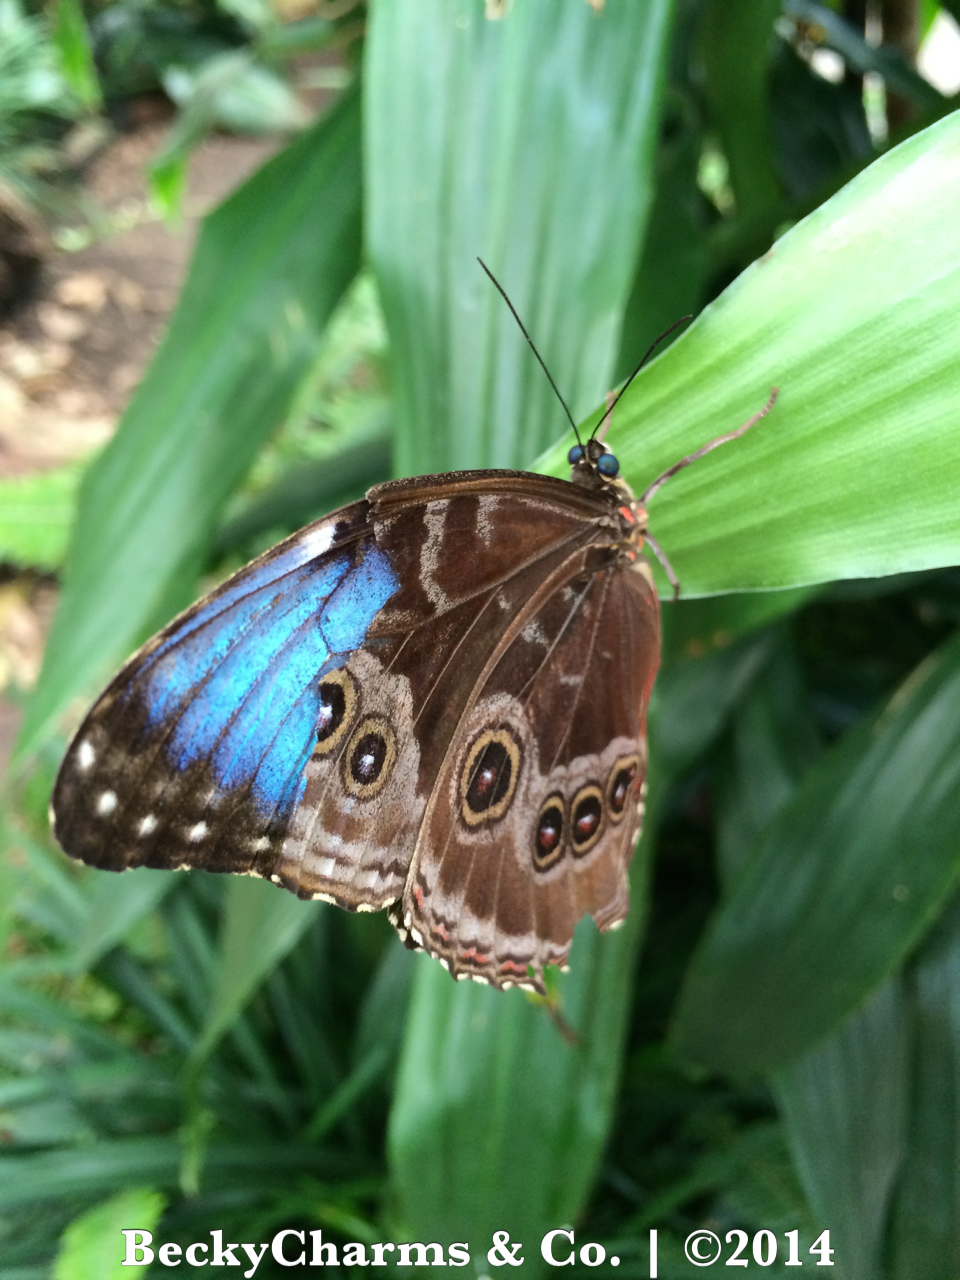 Our Trip to Butterfly Jungle at San Diego Safari Park for Spring Break 2014 by BeckyCharms